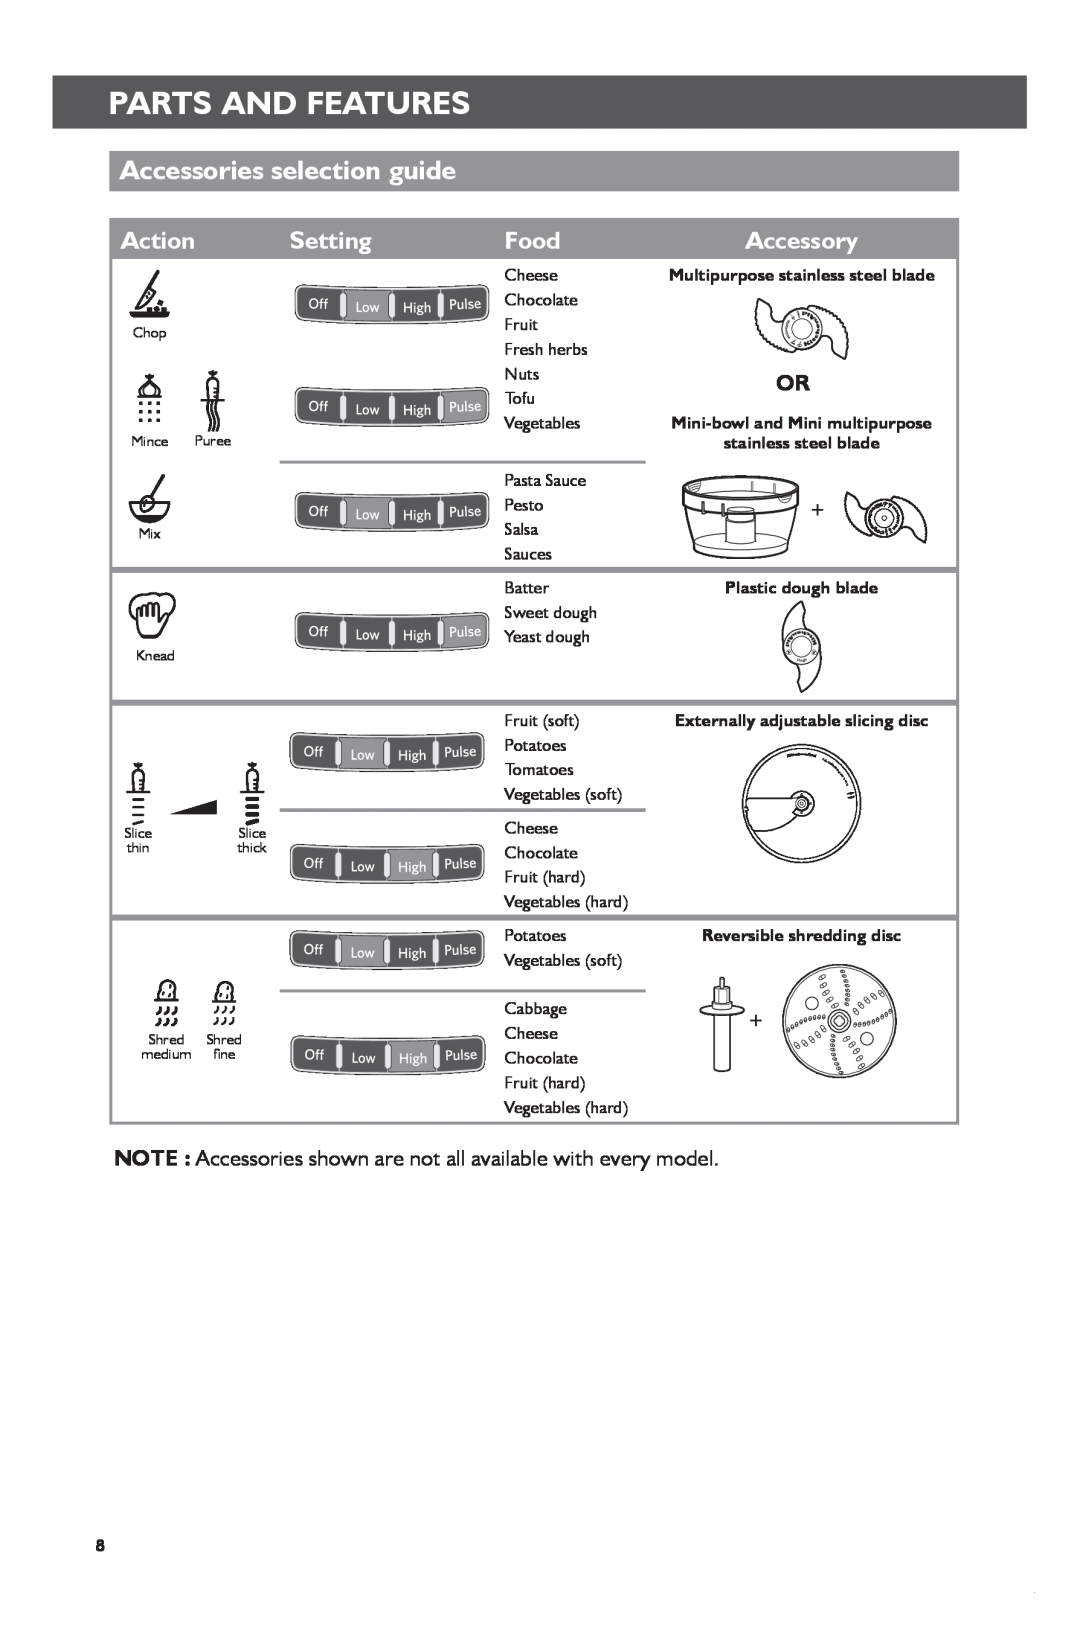 KitchenAid KFP1133 Accessories selection guide, Action, Setting, Food, Partscmd +Andshiftfeaturesclick To Change Copy 